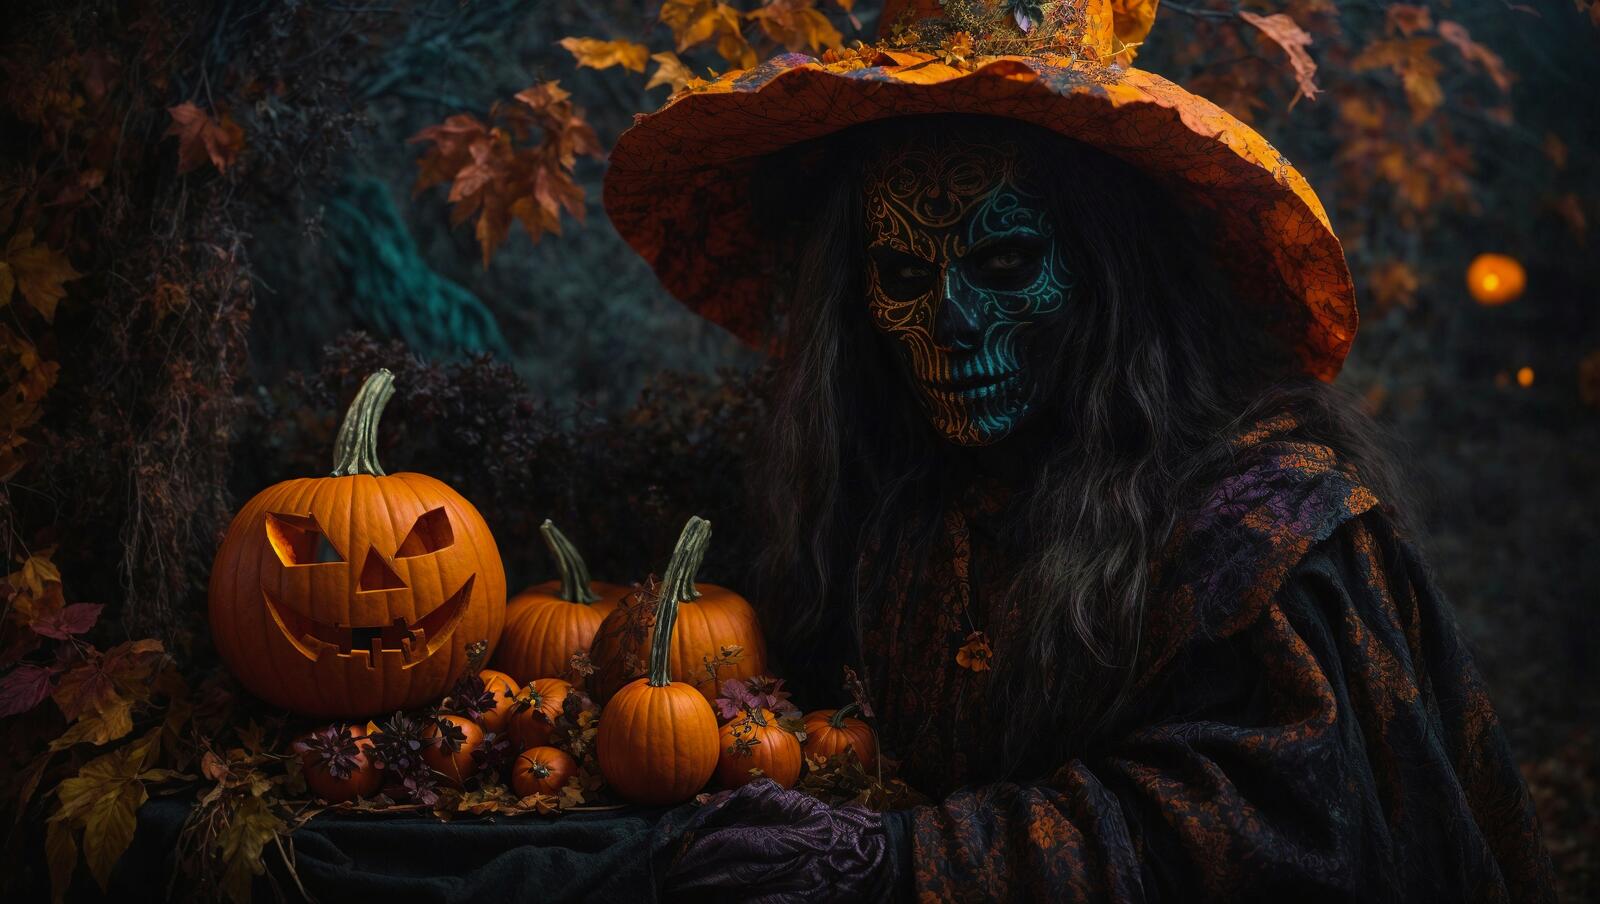 Free photo The scary witch is holding a pumpkin.